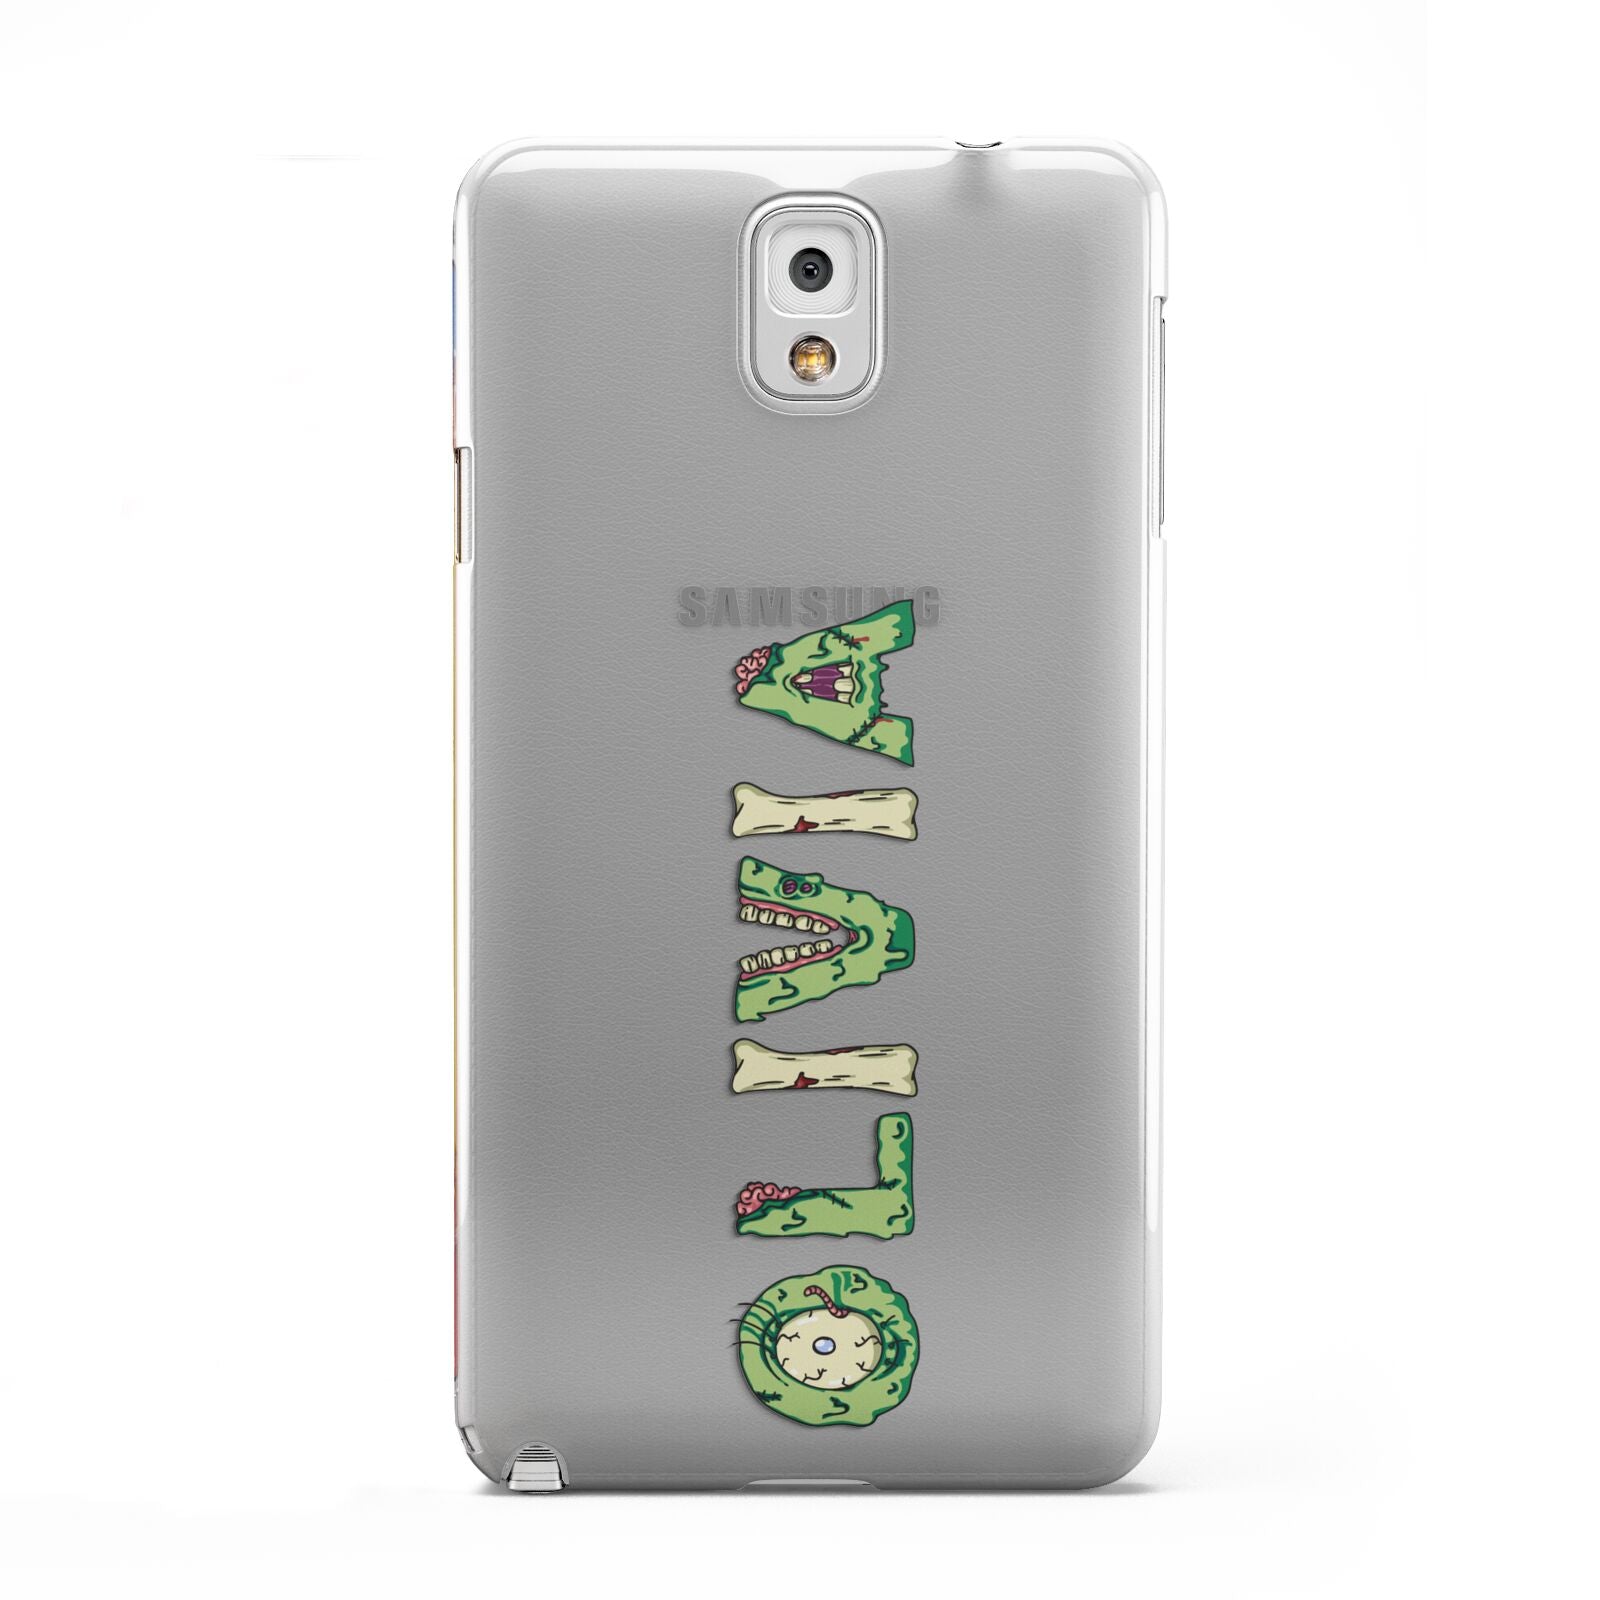 Customised Name Zombie Samsung Galaxy Note 3 Case